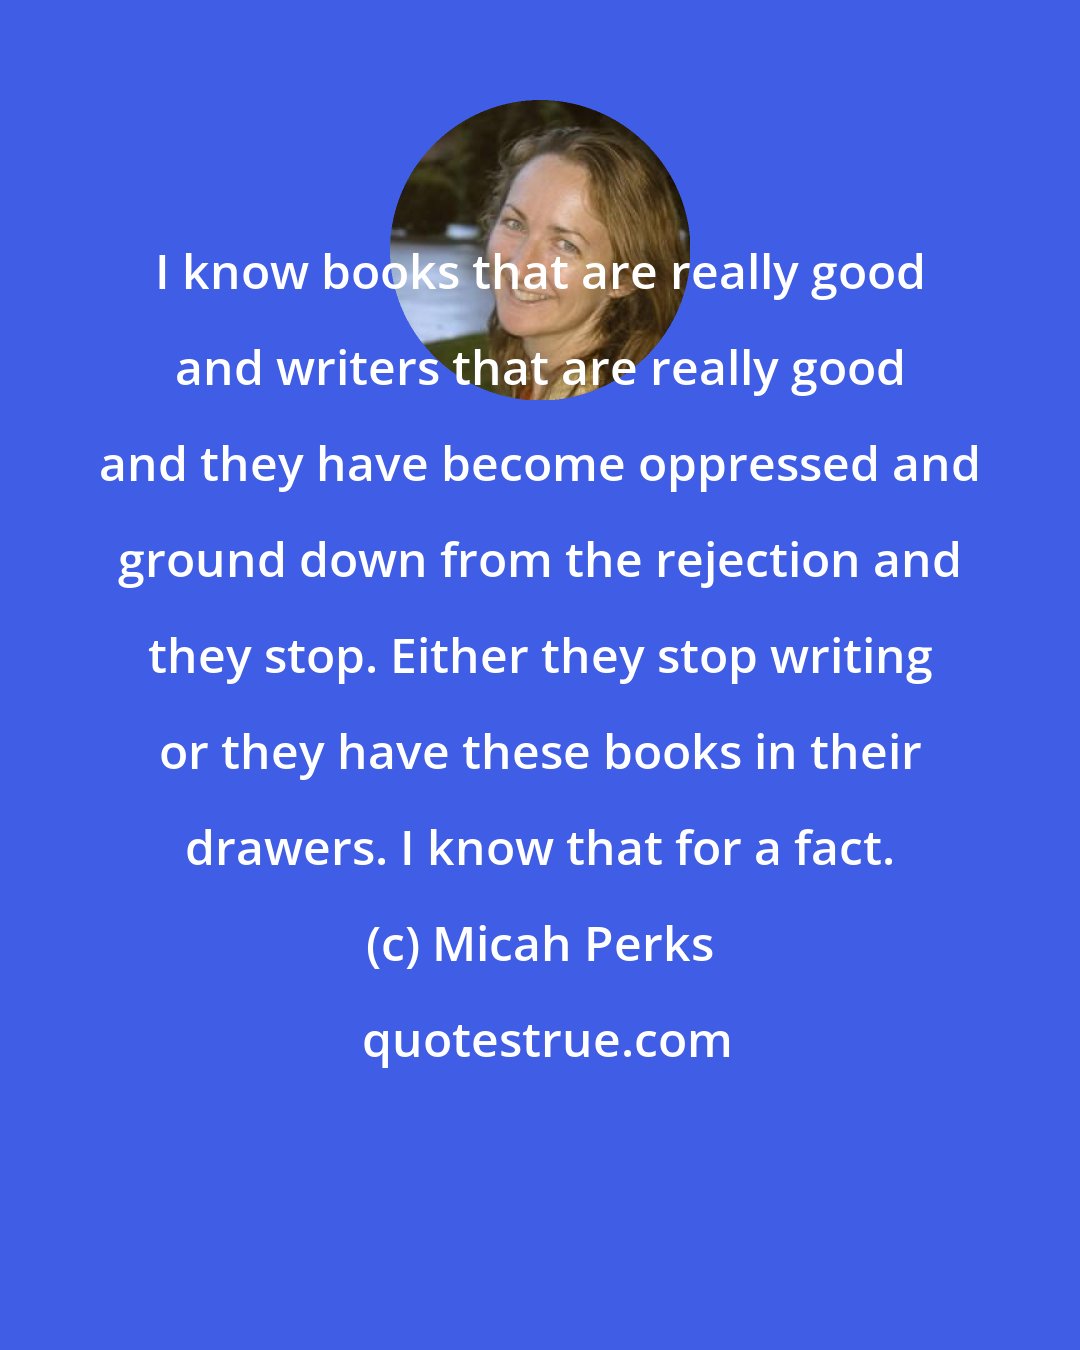 Micah Perks: I know books that are really good and writers that are really good and they have become oppressed and ground down from the rejection and they stop. Either they stop writing or they have these books in their drawers. I know that for a fact.